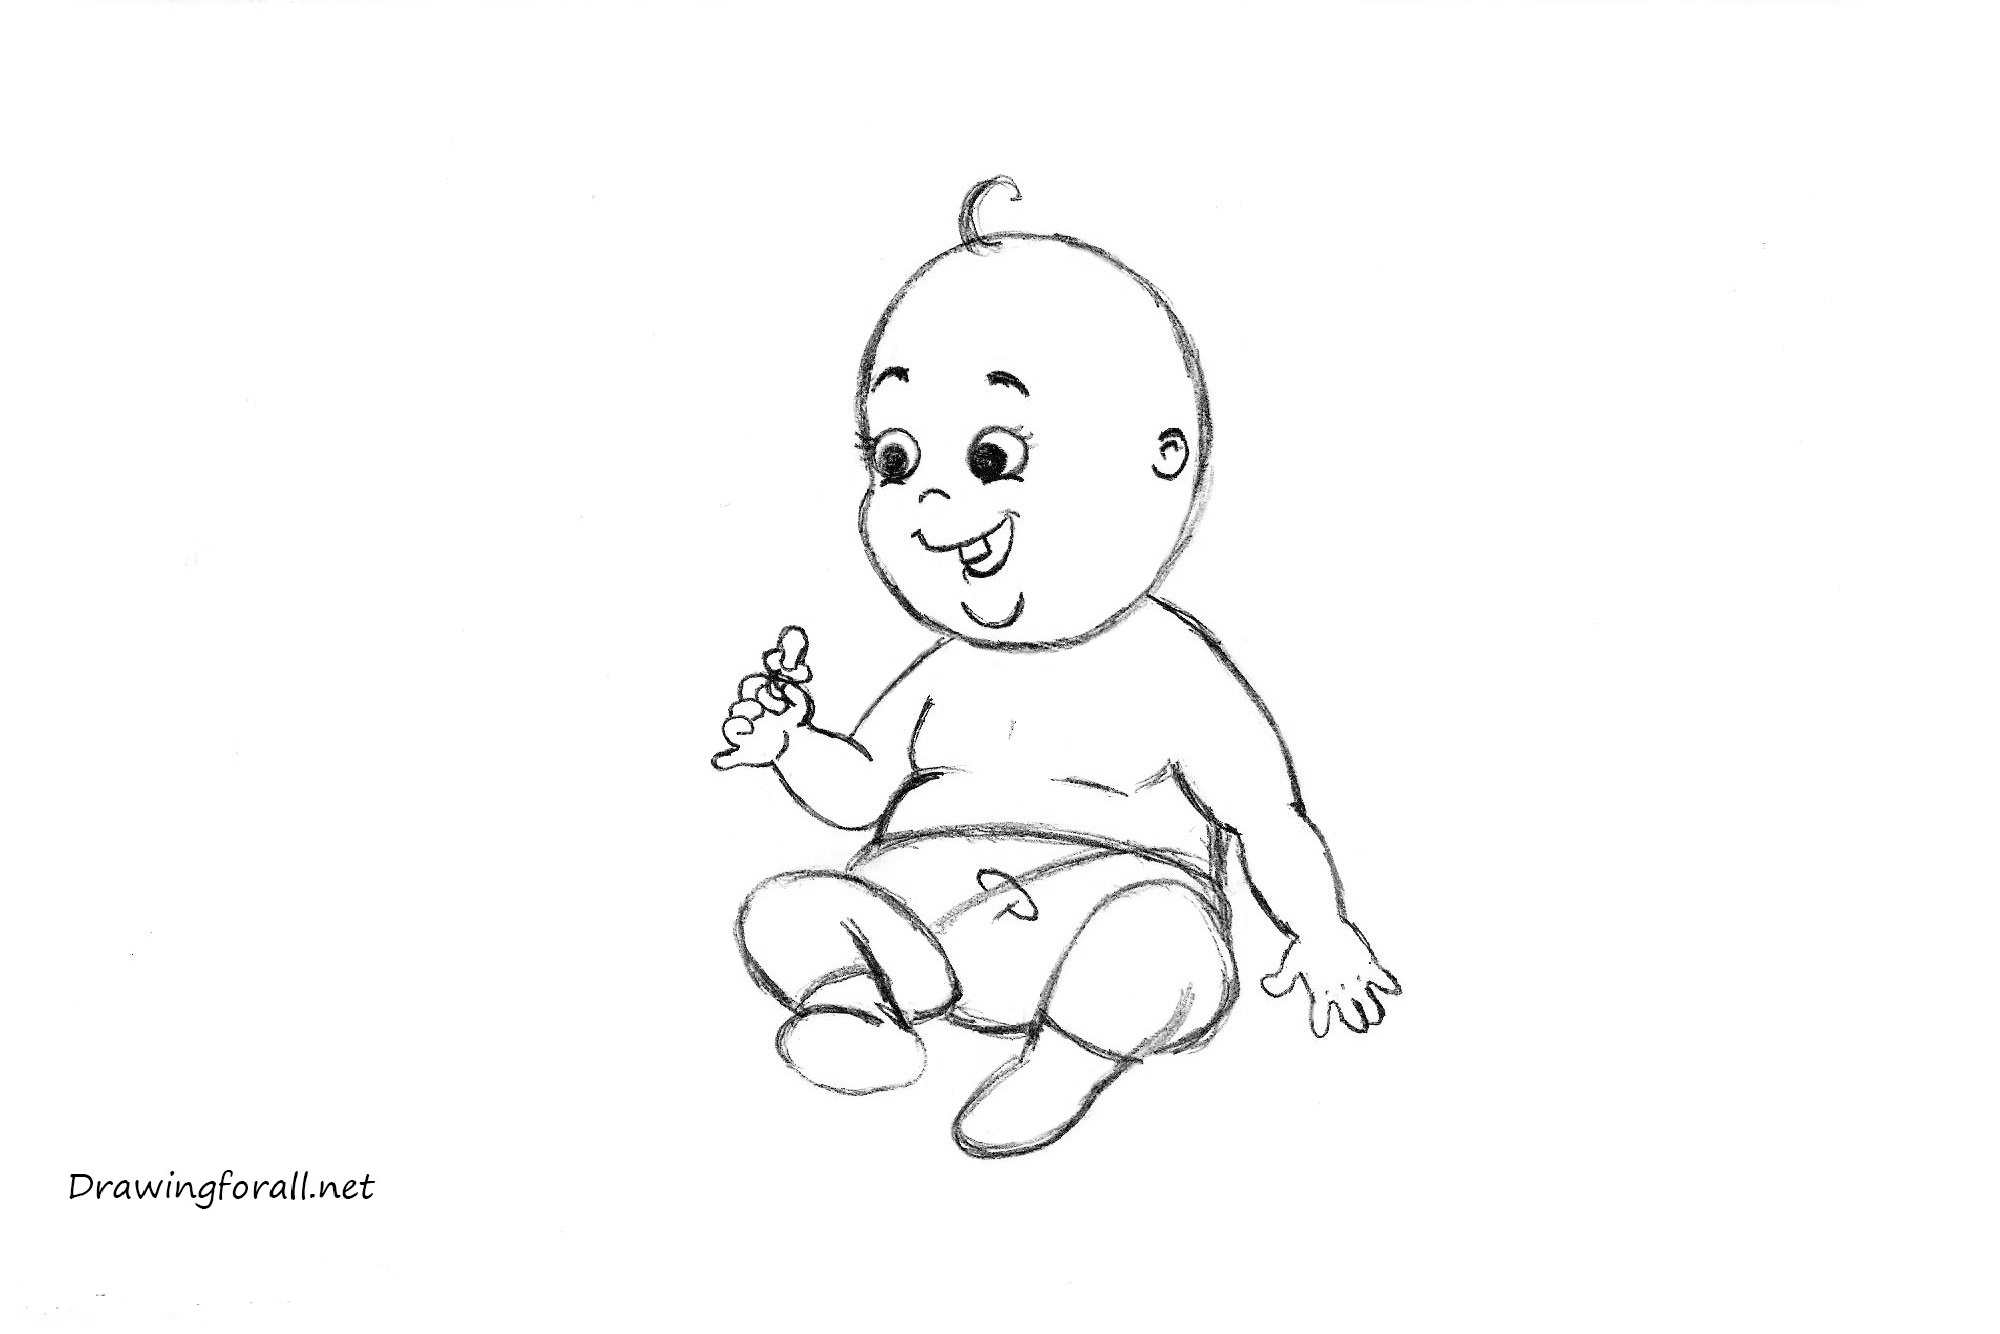 how to draw a baby for beginners | Drawingforall.net